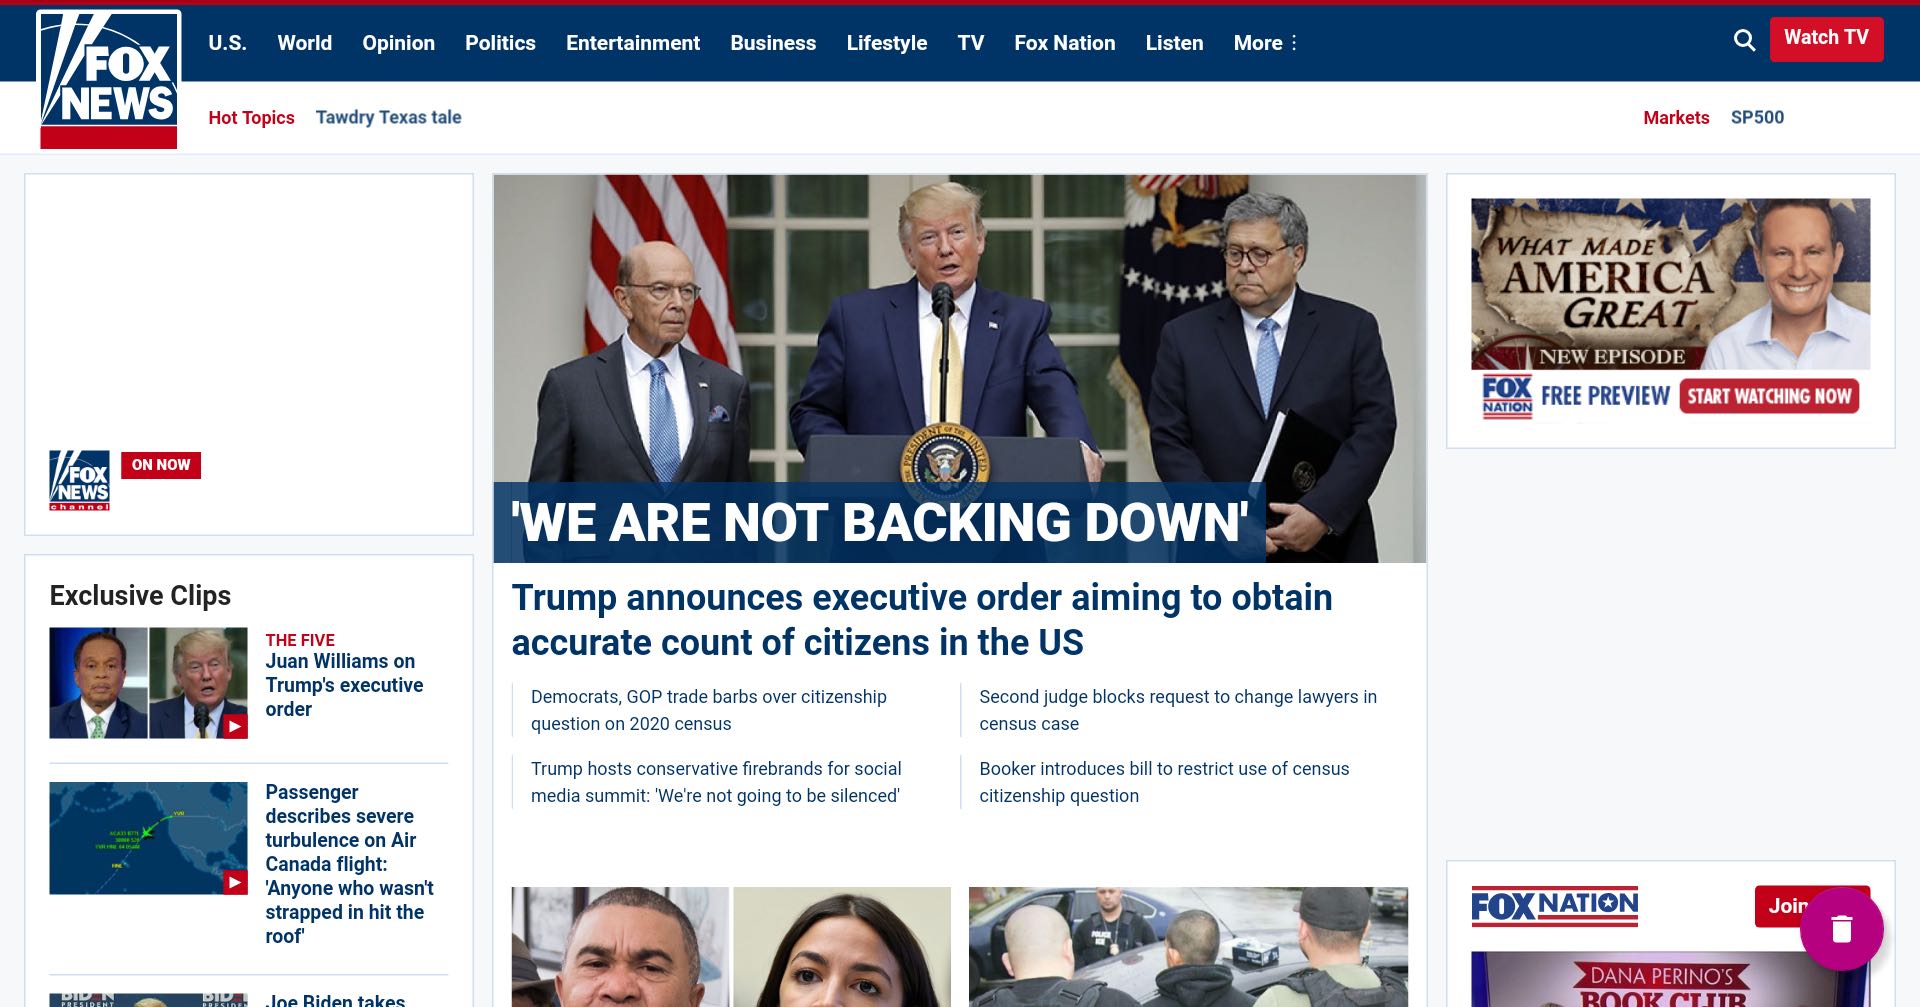 The Fox News home page on July 7, 2019